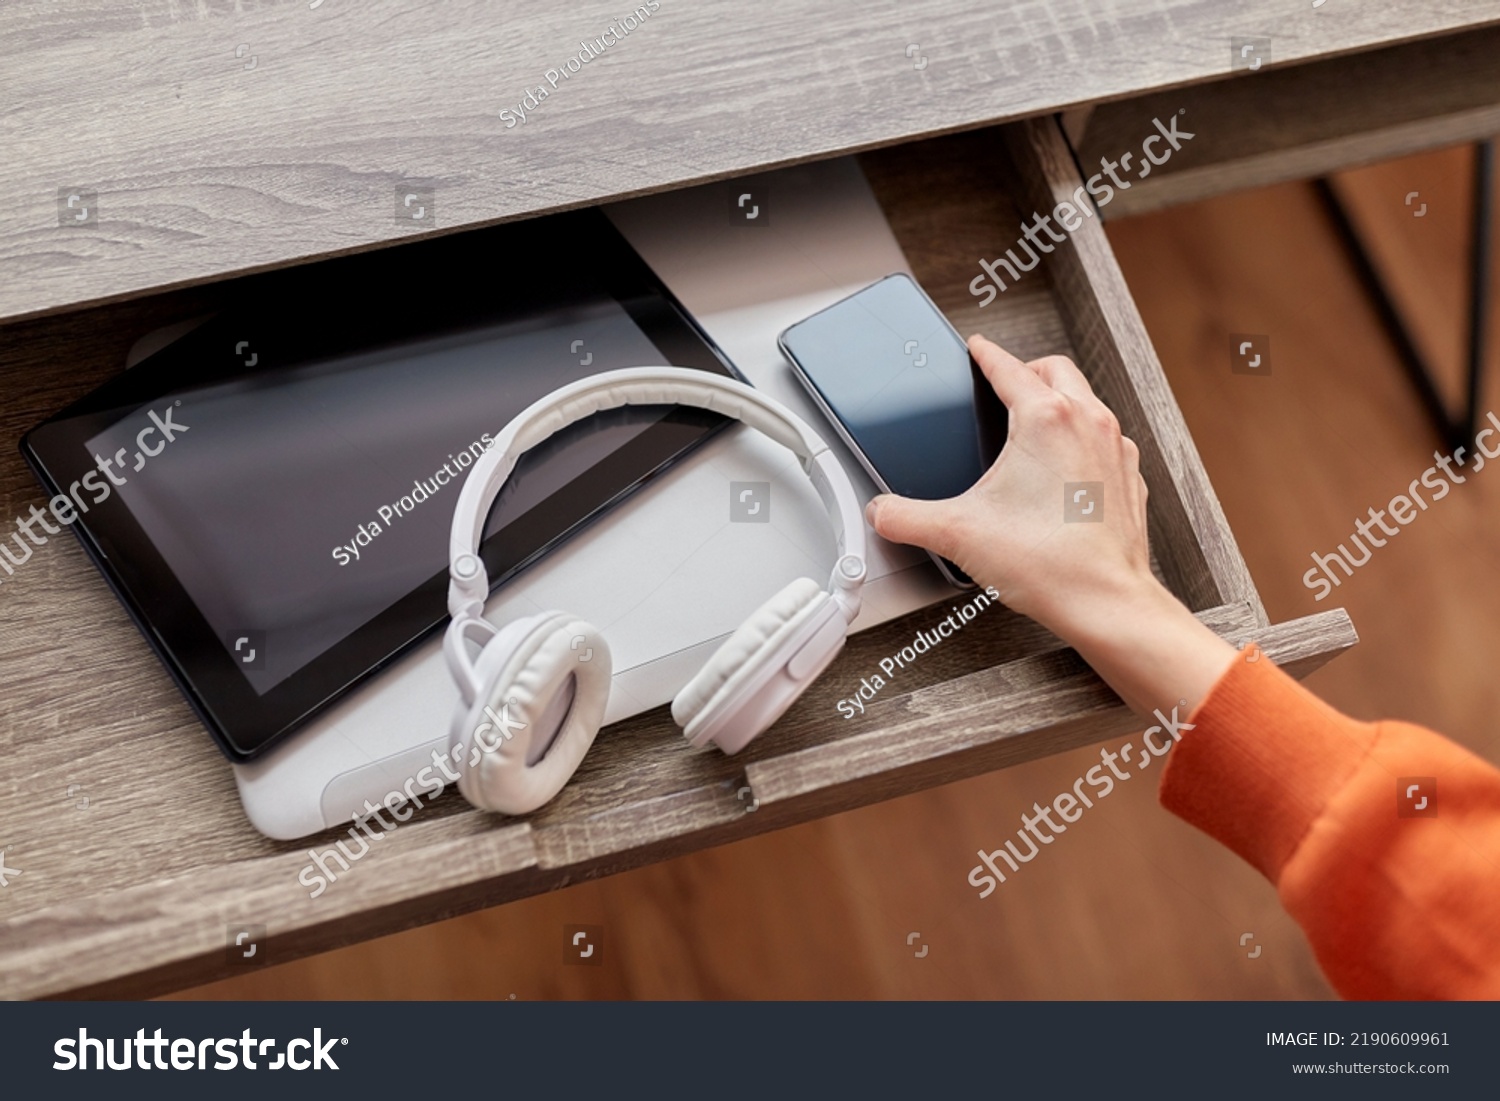 digital detox and technology concept - close up of hand with smartphone and different gadgets in desk drawer at home #2190609961